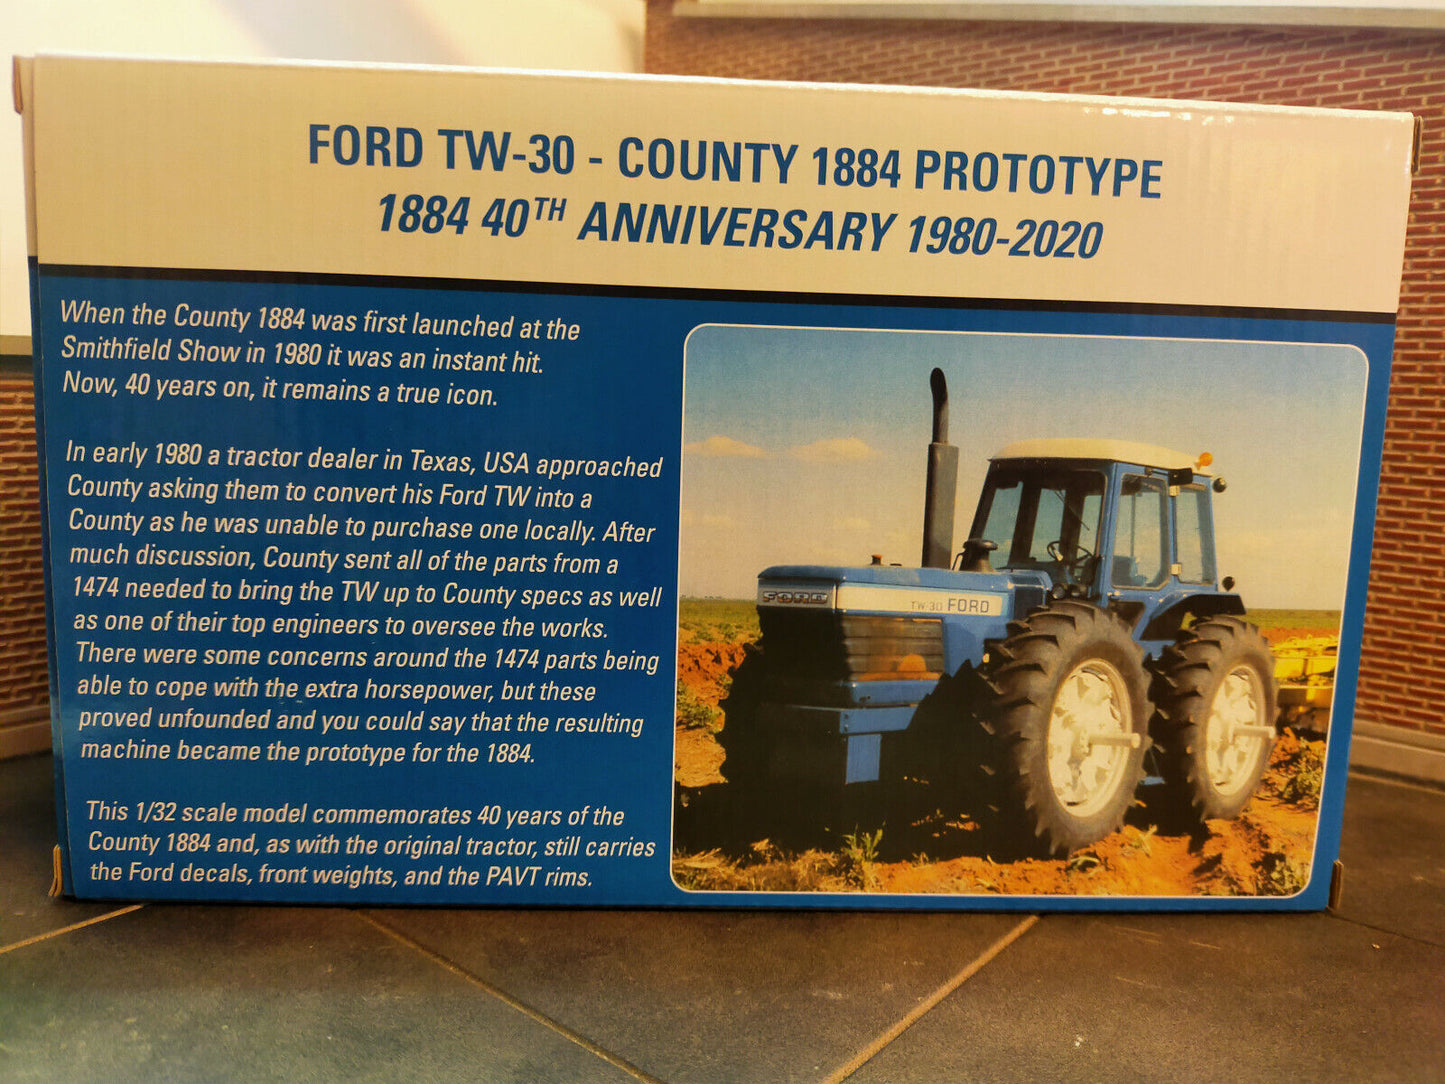 Ford TW-30 County 1884 Prototype 40e anniversaire sous licence officielle Universal Hobbies UH6302 1:32